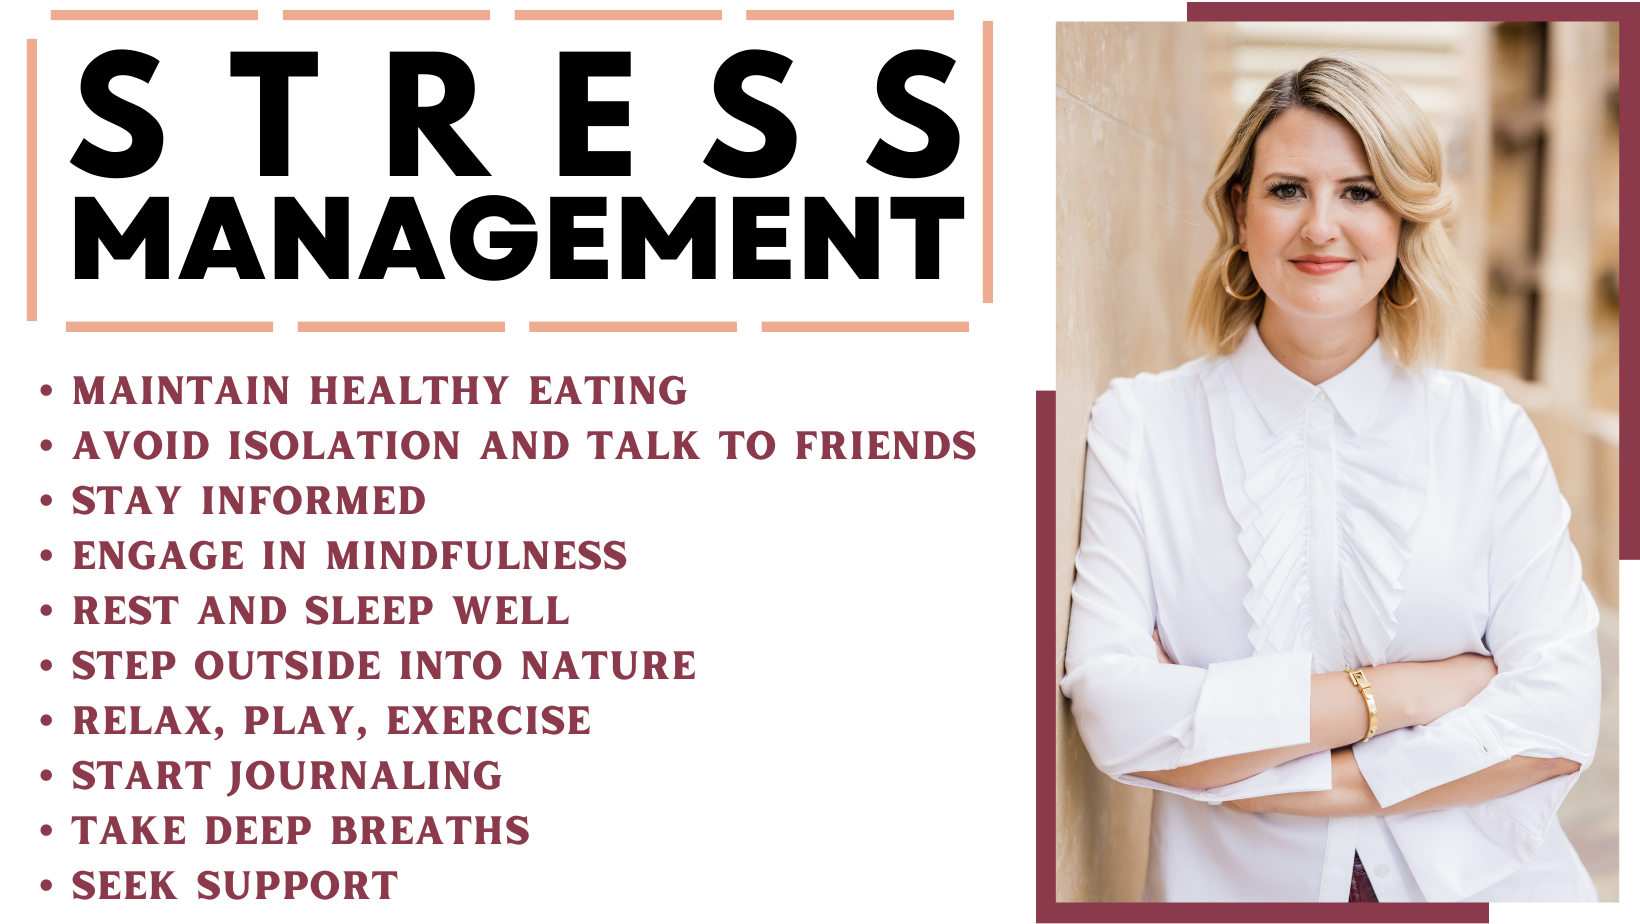 Stress Management - Reduce and Relieve Stress - Bhopal